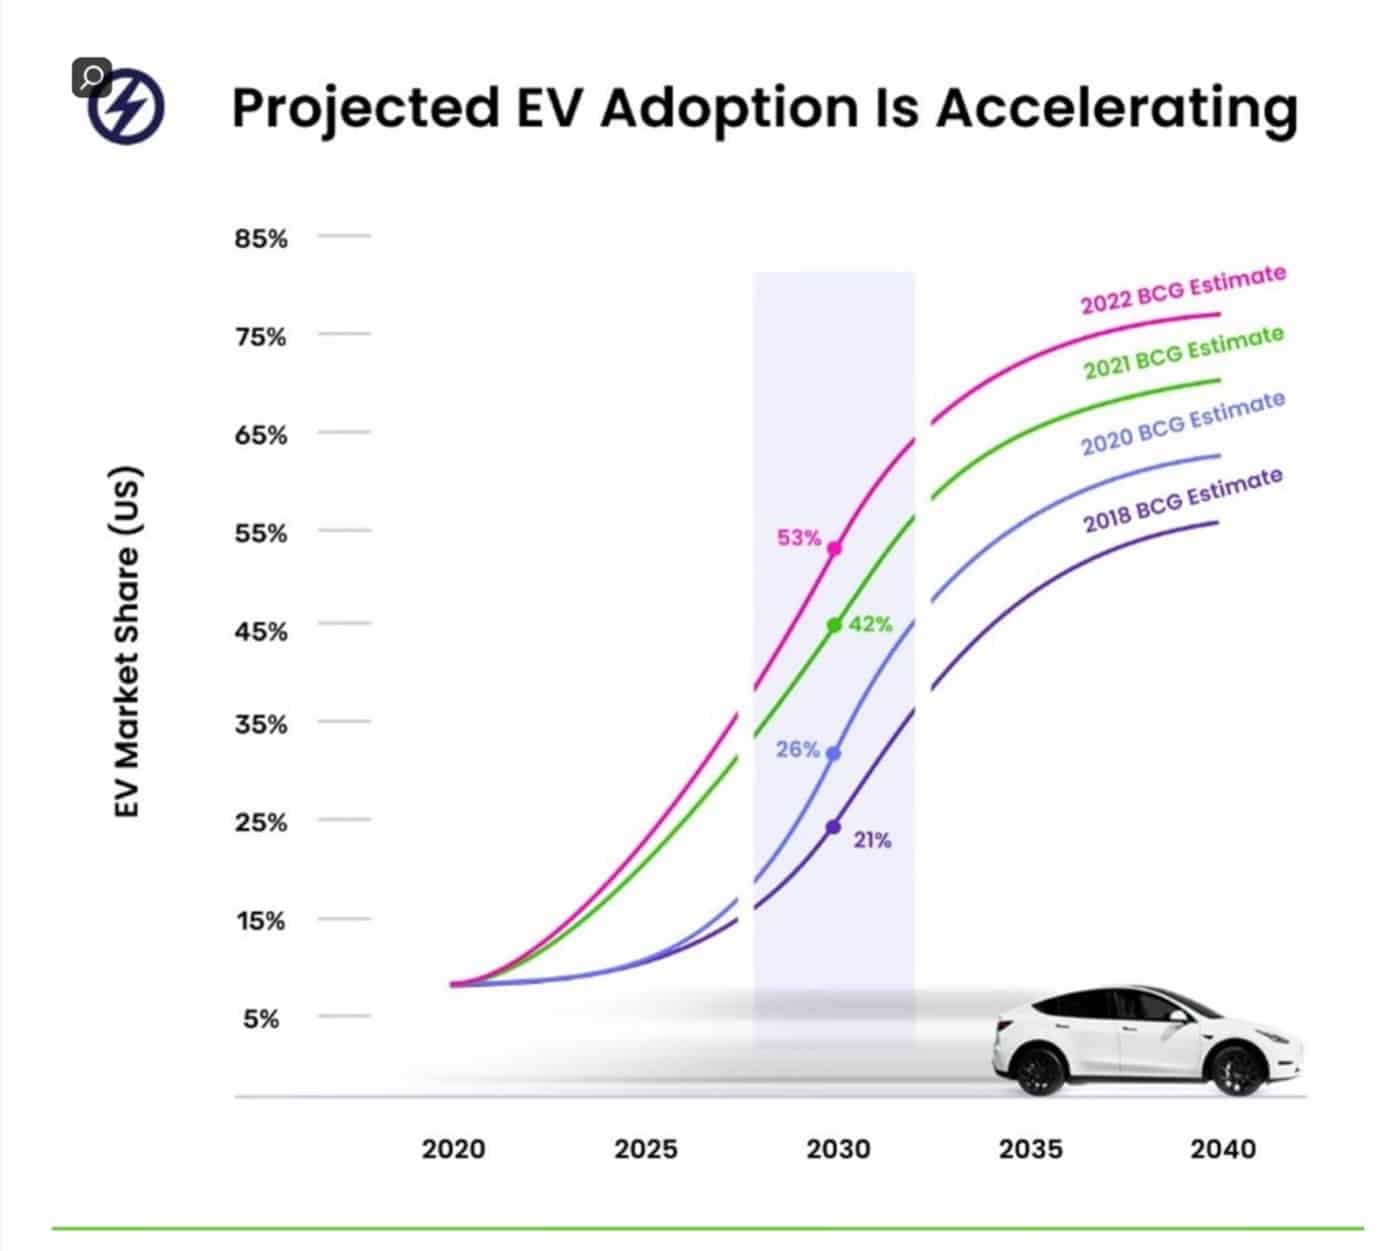 Software is now driving the Electric Vehicle charging market